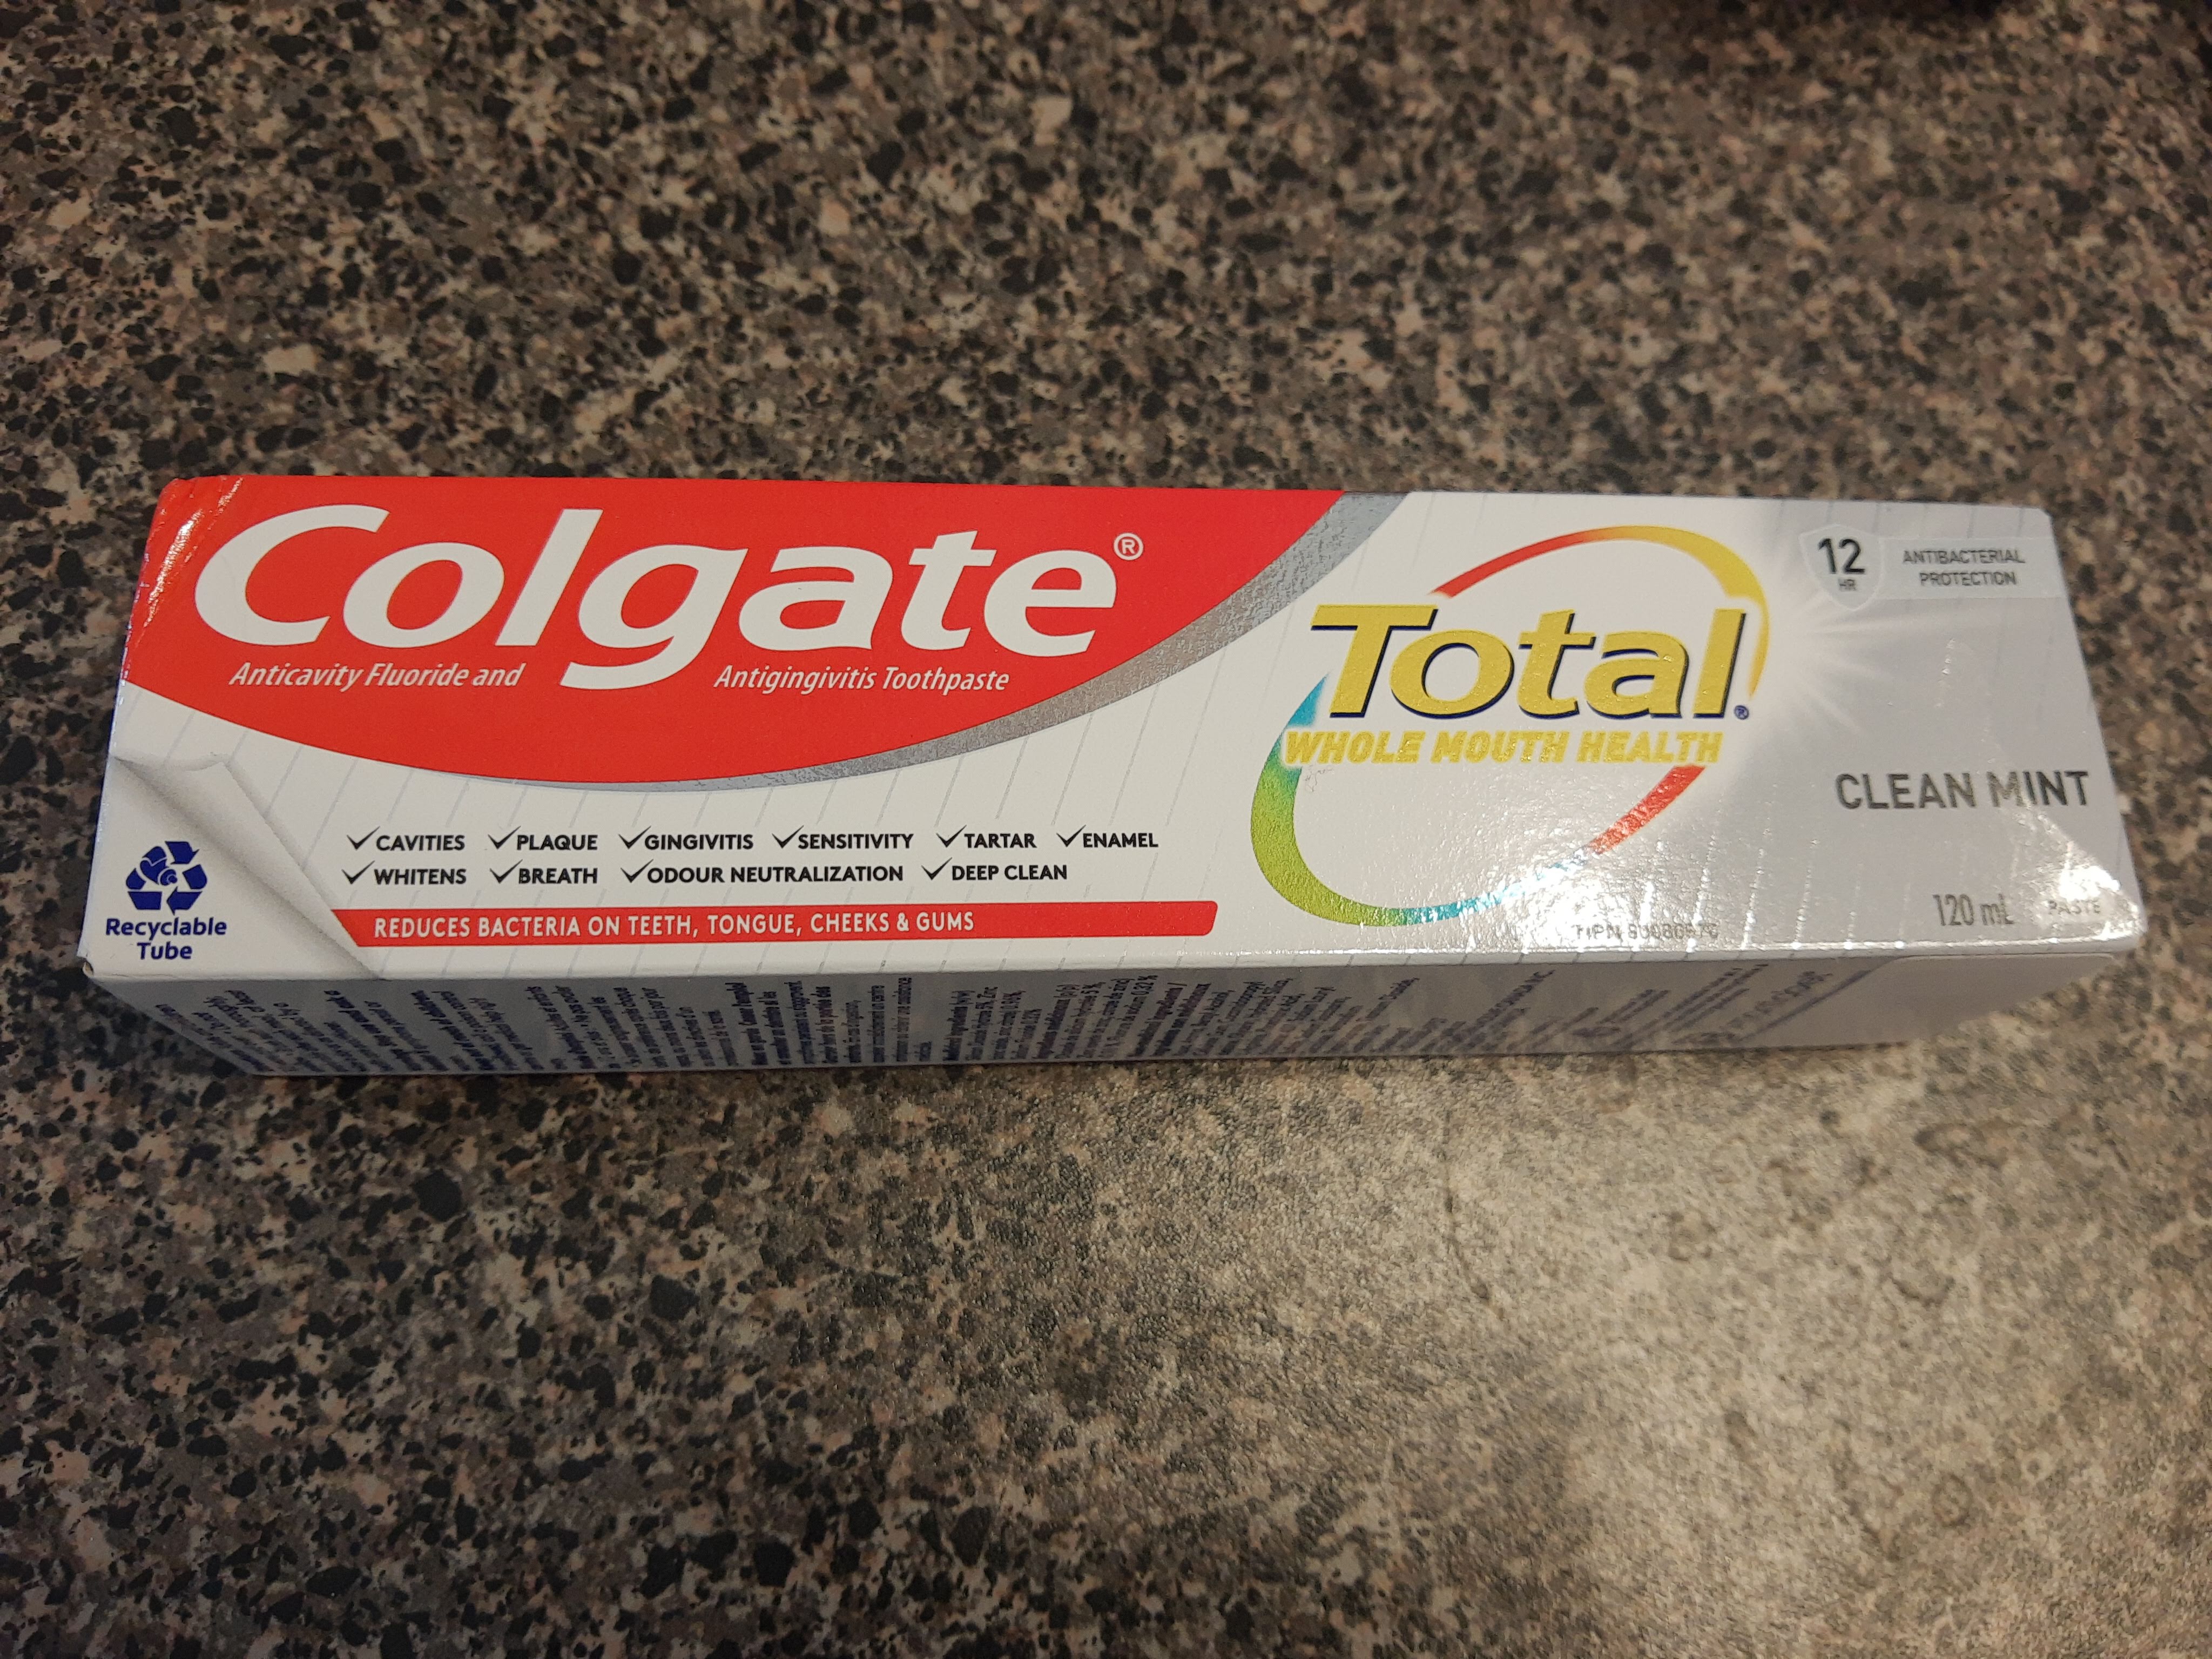 Recyclable toothpaste tube by Colgate